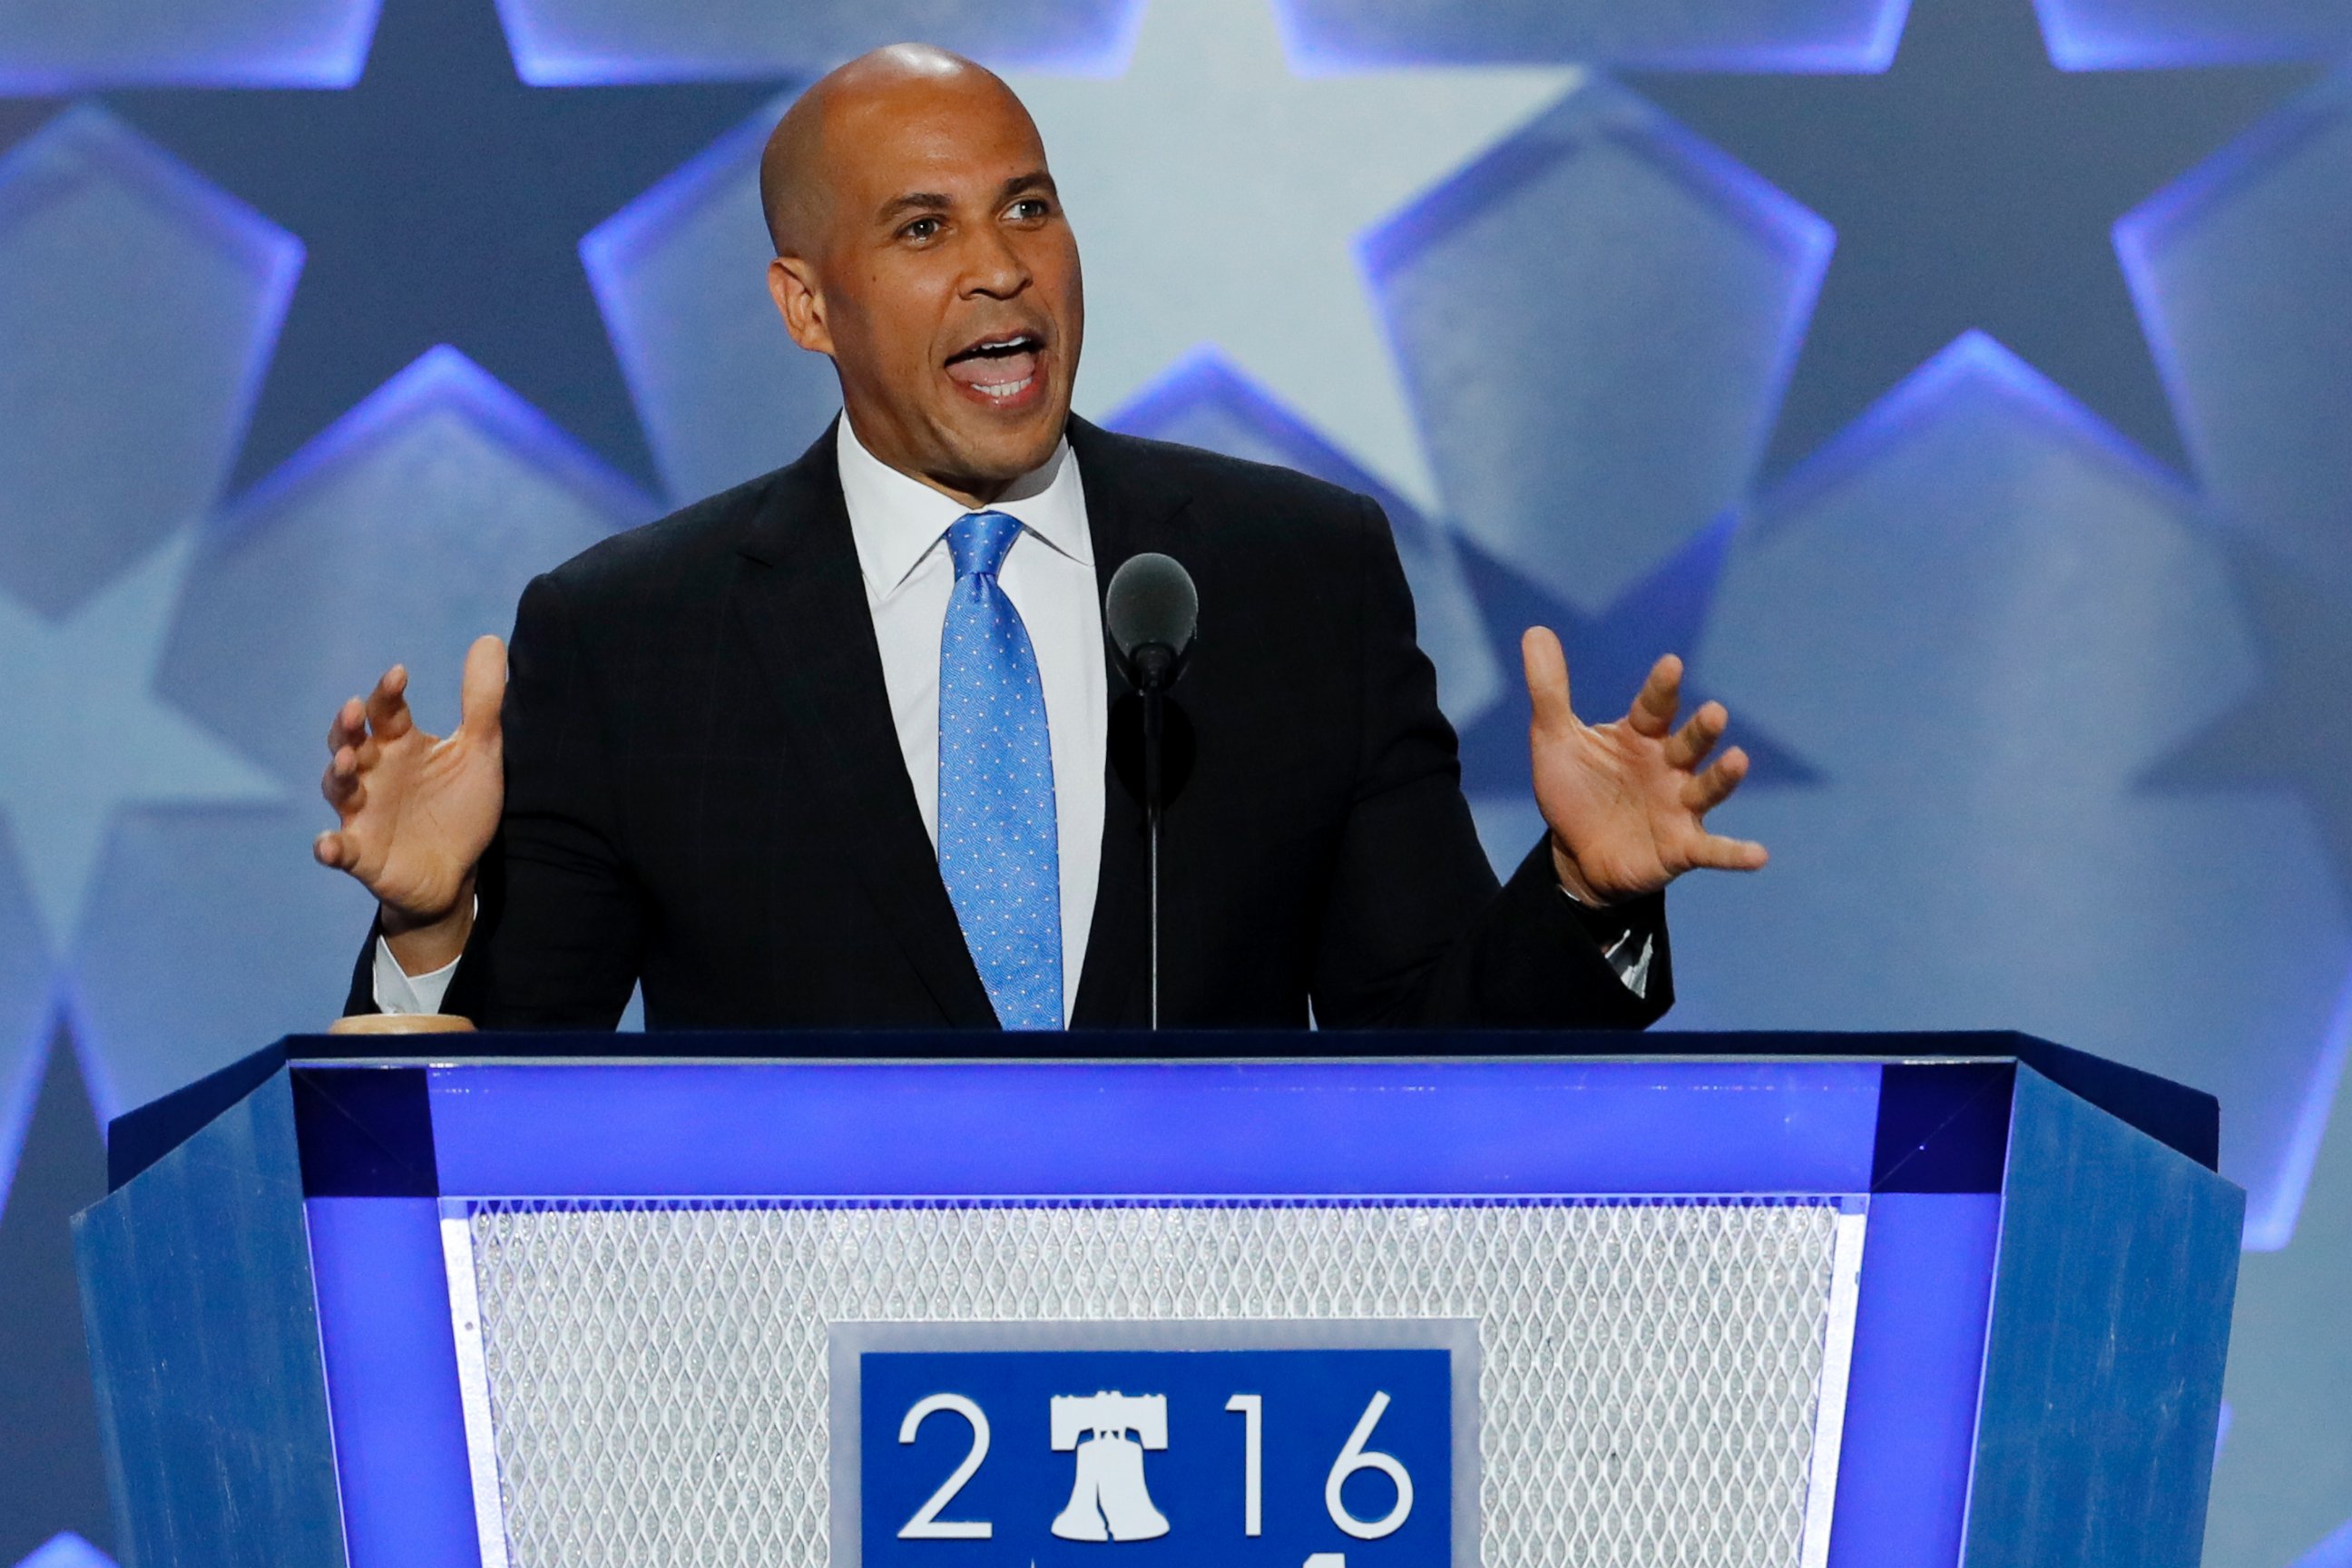 PHOTO: Sen. Cory Booker, D-NJ., speaks during the first day of the Democratic National Convention in Philadelphia, Pennsylvania, July 25, 2016.